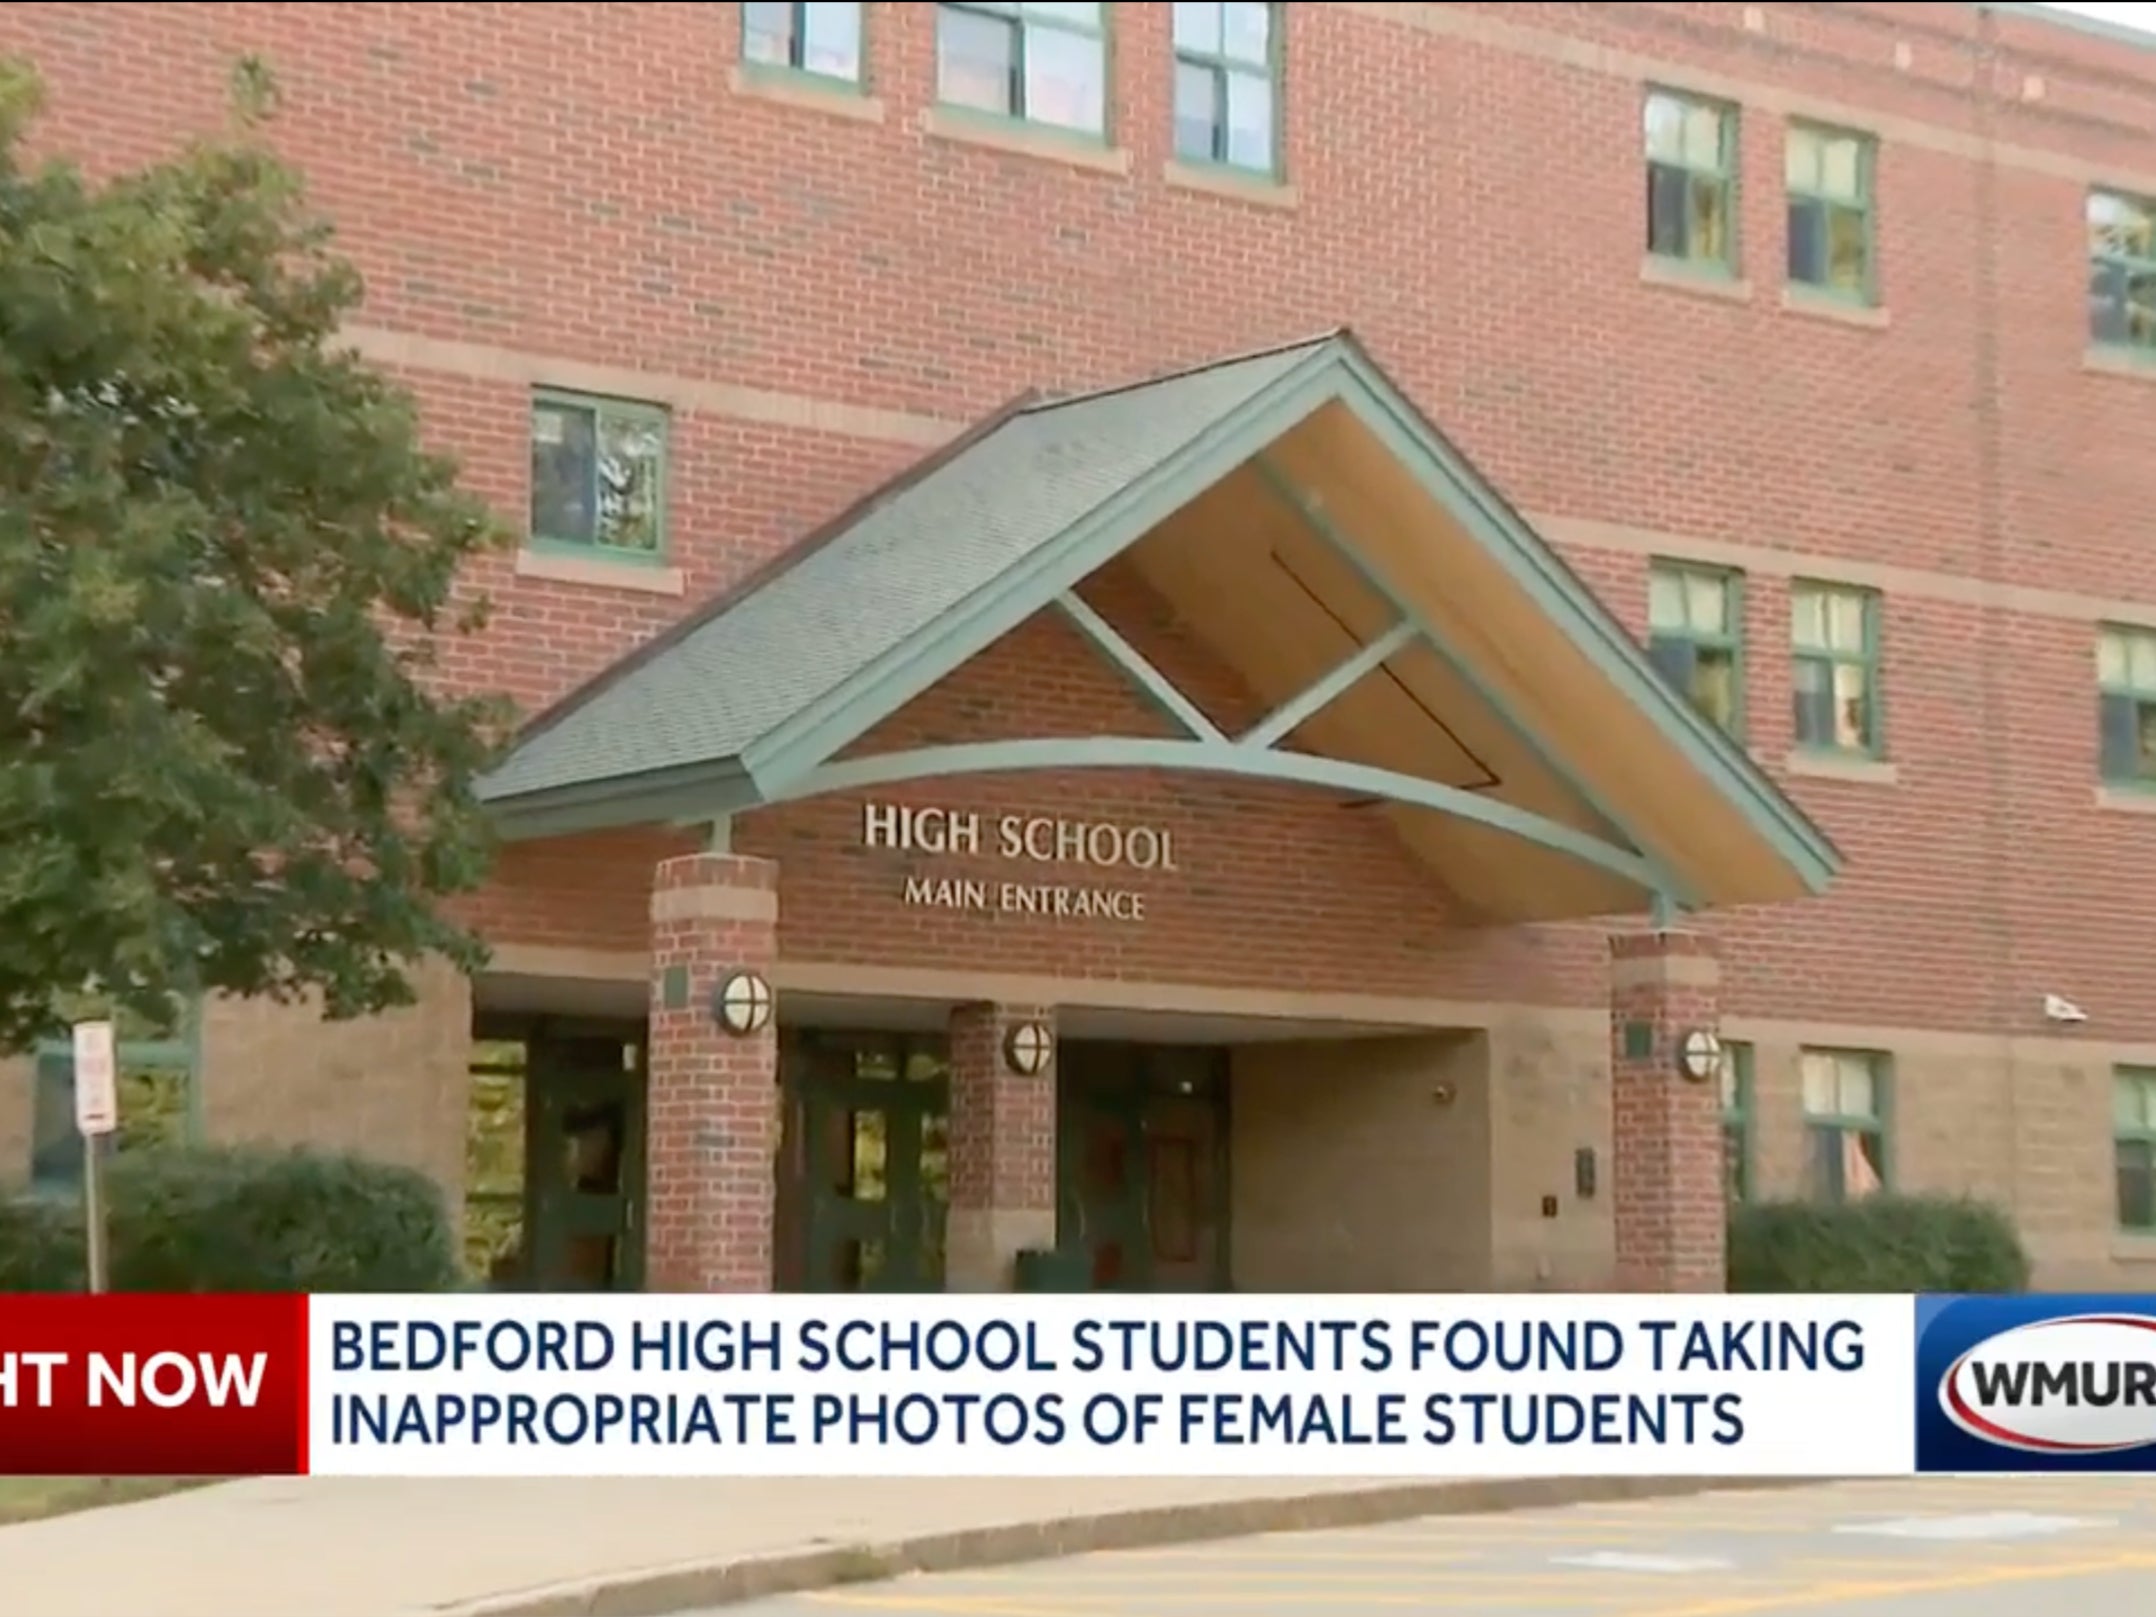 Bedford High School in New Hampshire